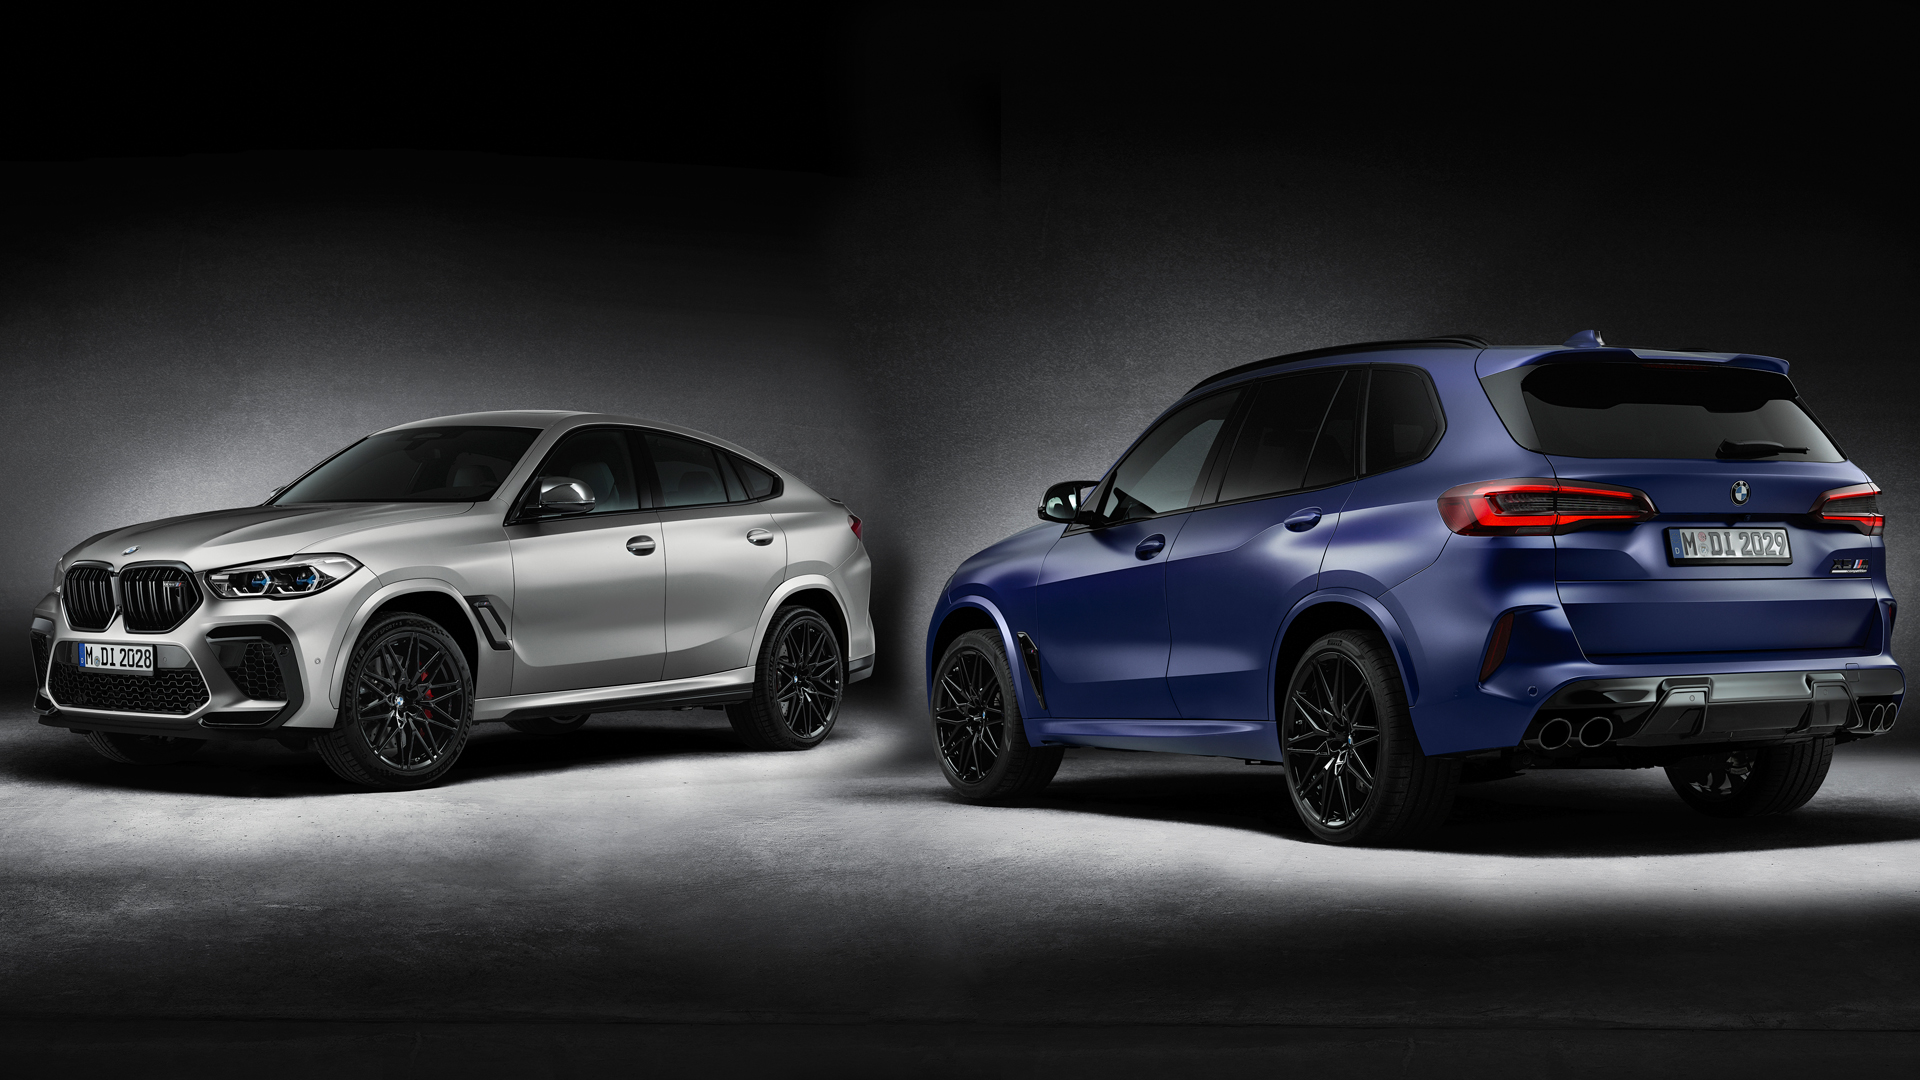  bmw x5 m x6 m competition first edition